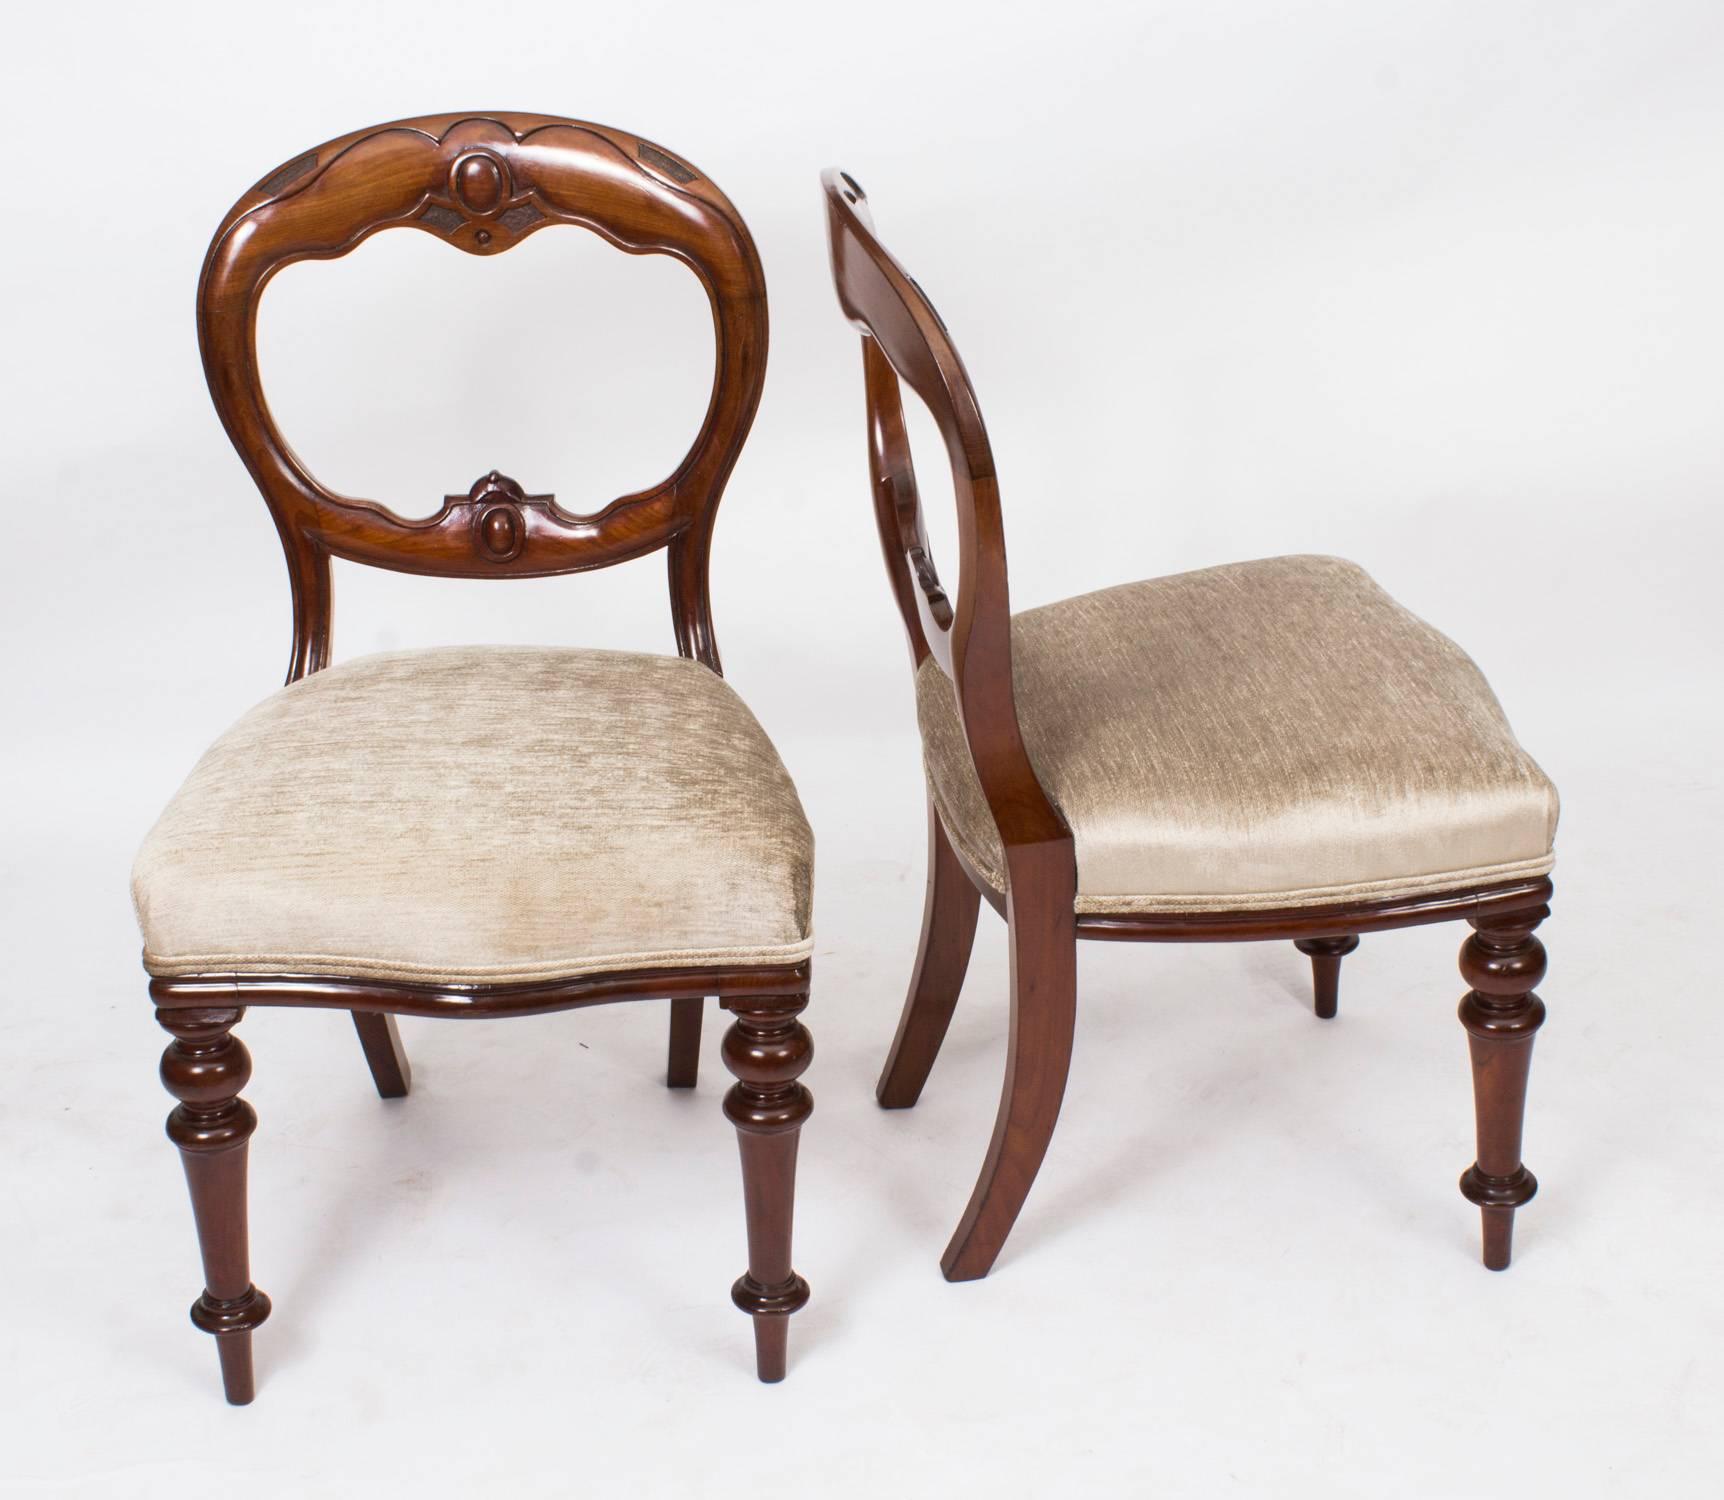 This is a fabulous set of eight antique English Victorian Balloon Back dining chairs, circa 1870 in date.
These chairs have been masterfully crafted in beautiful solid mahogany. They have balloon backs with stunning hand-carved decoration, Stand on